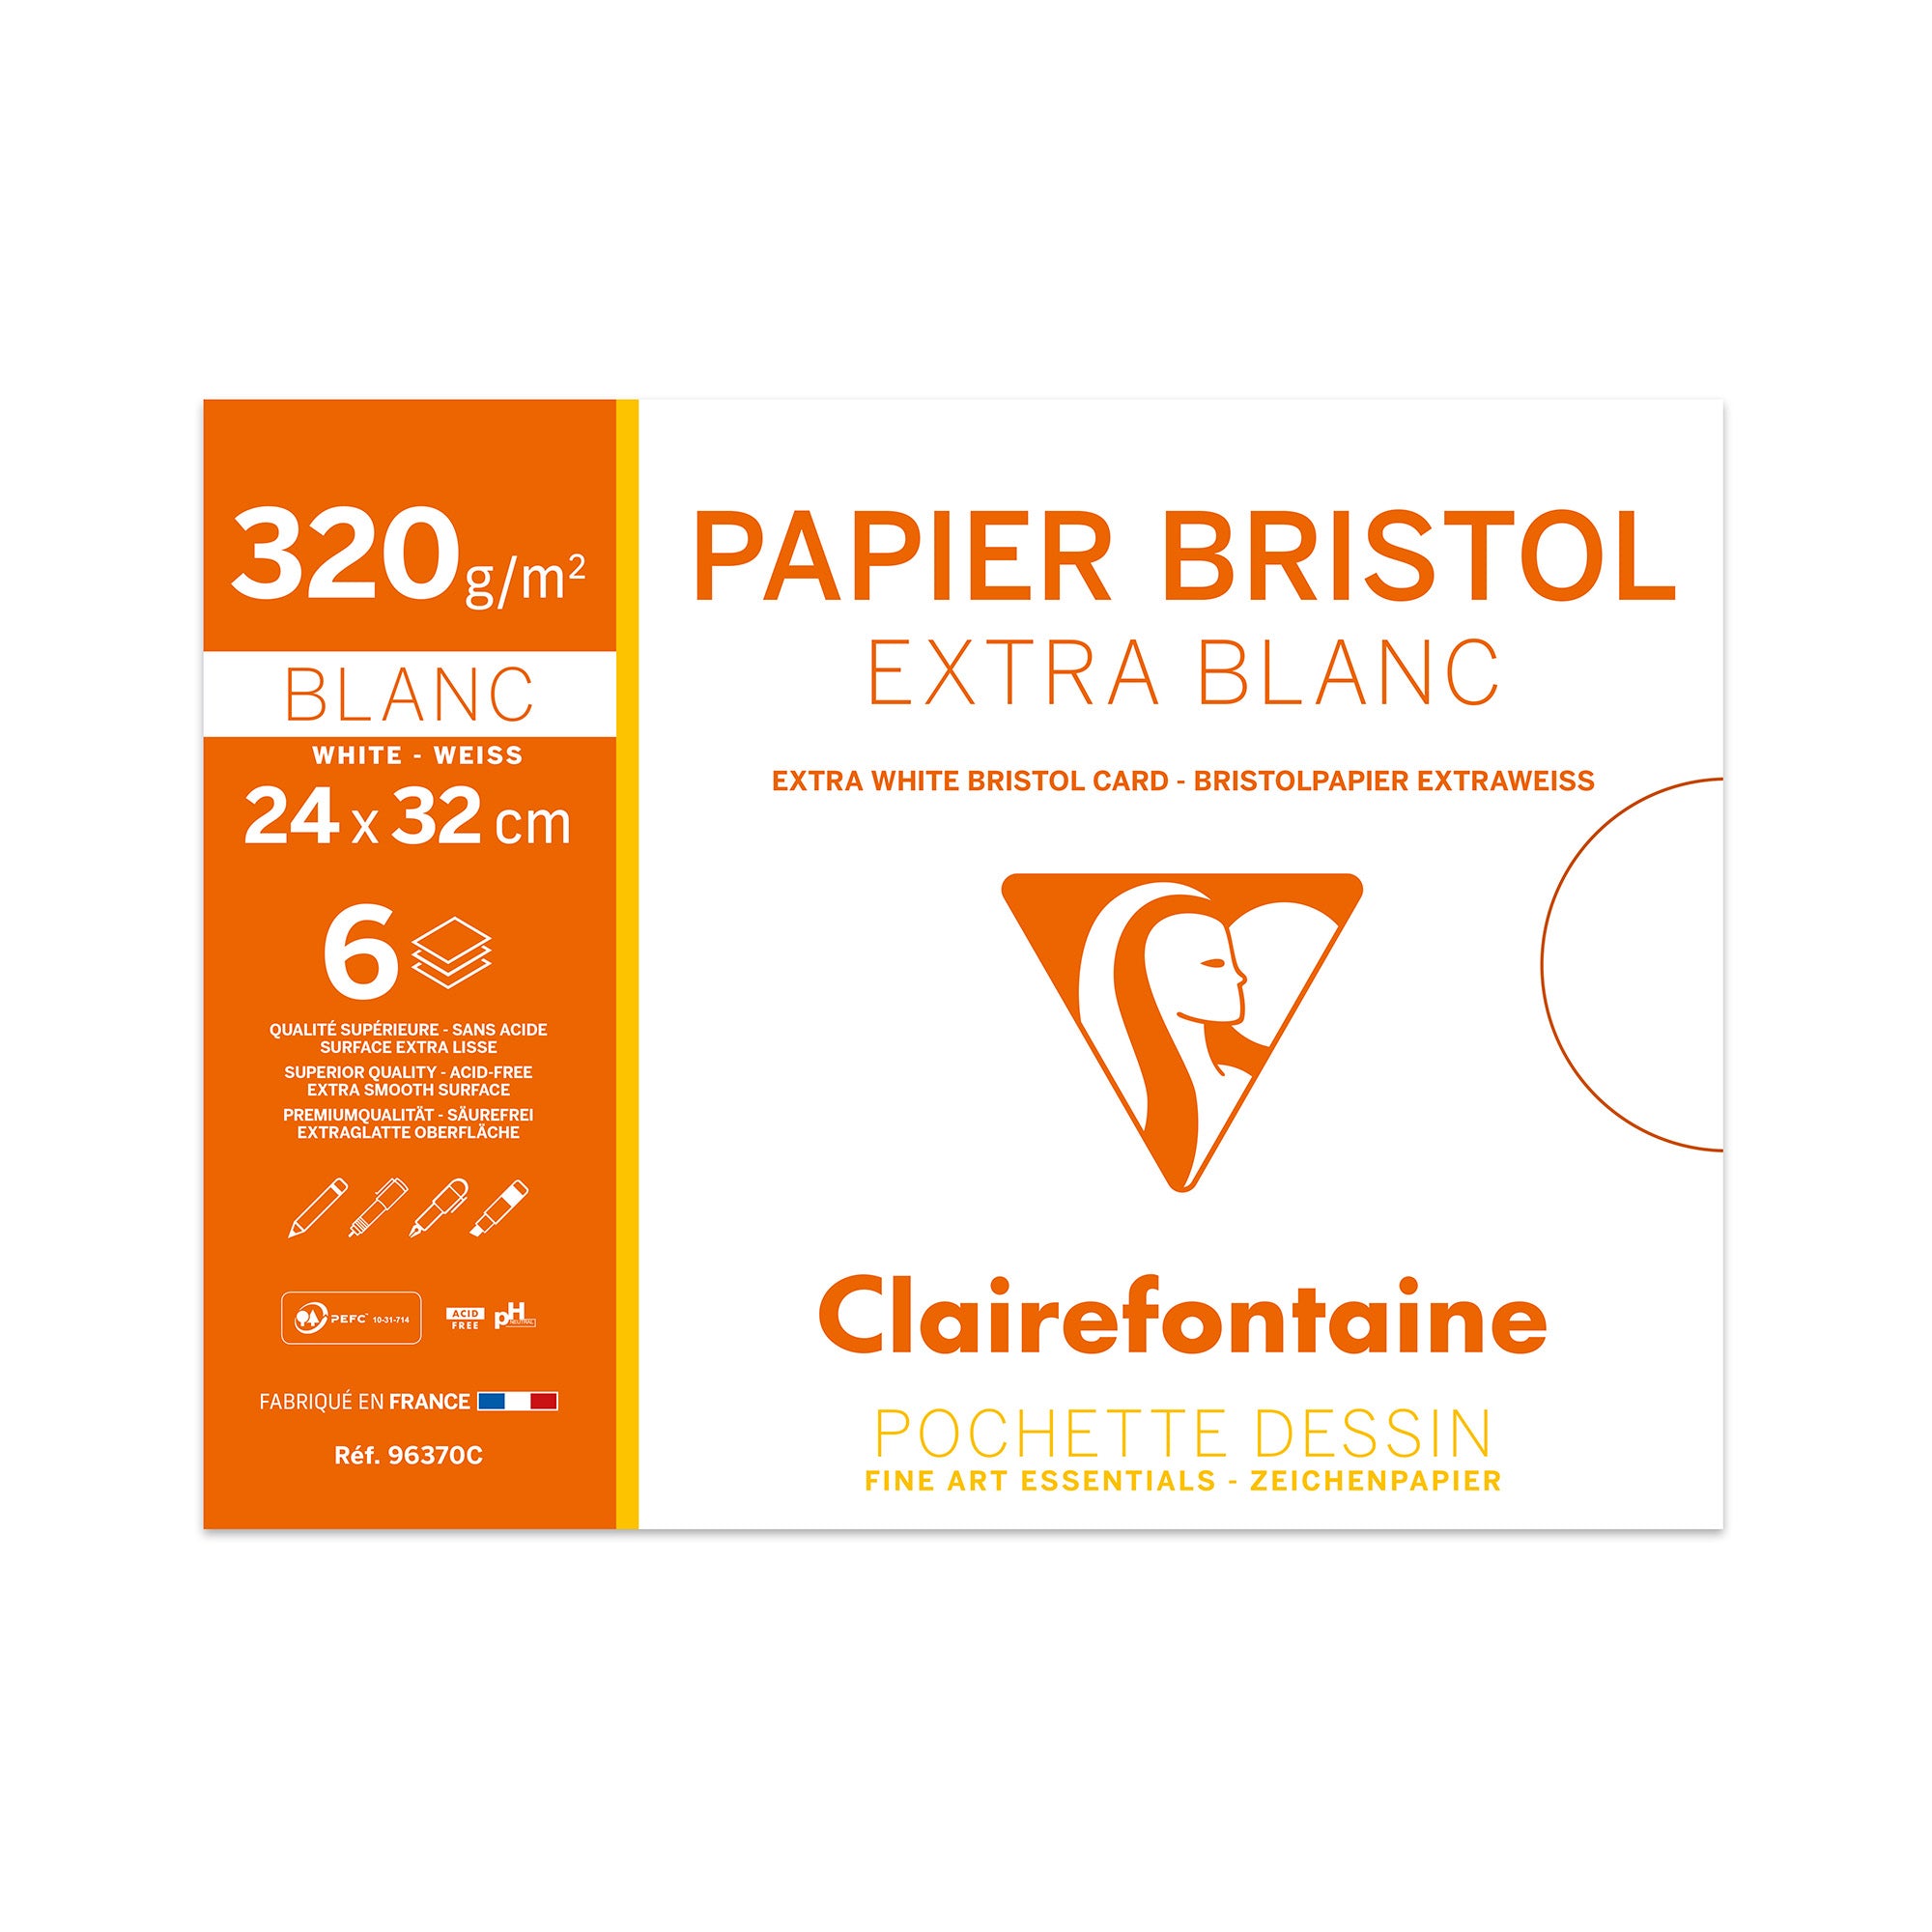 Clairefontaine Pastelmat Pad - 9-1/2 x 12, White, 12 Sheets